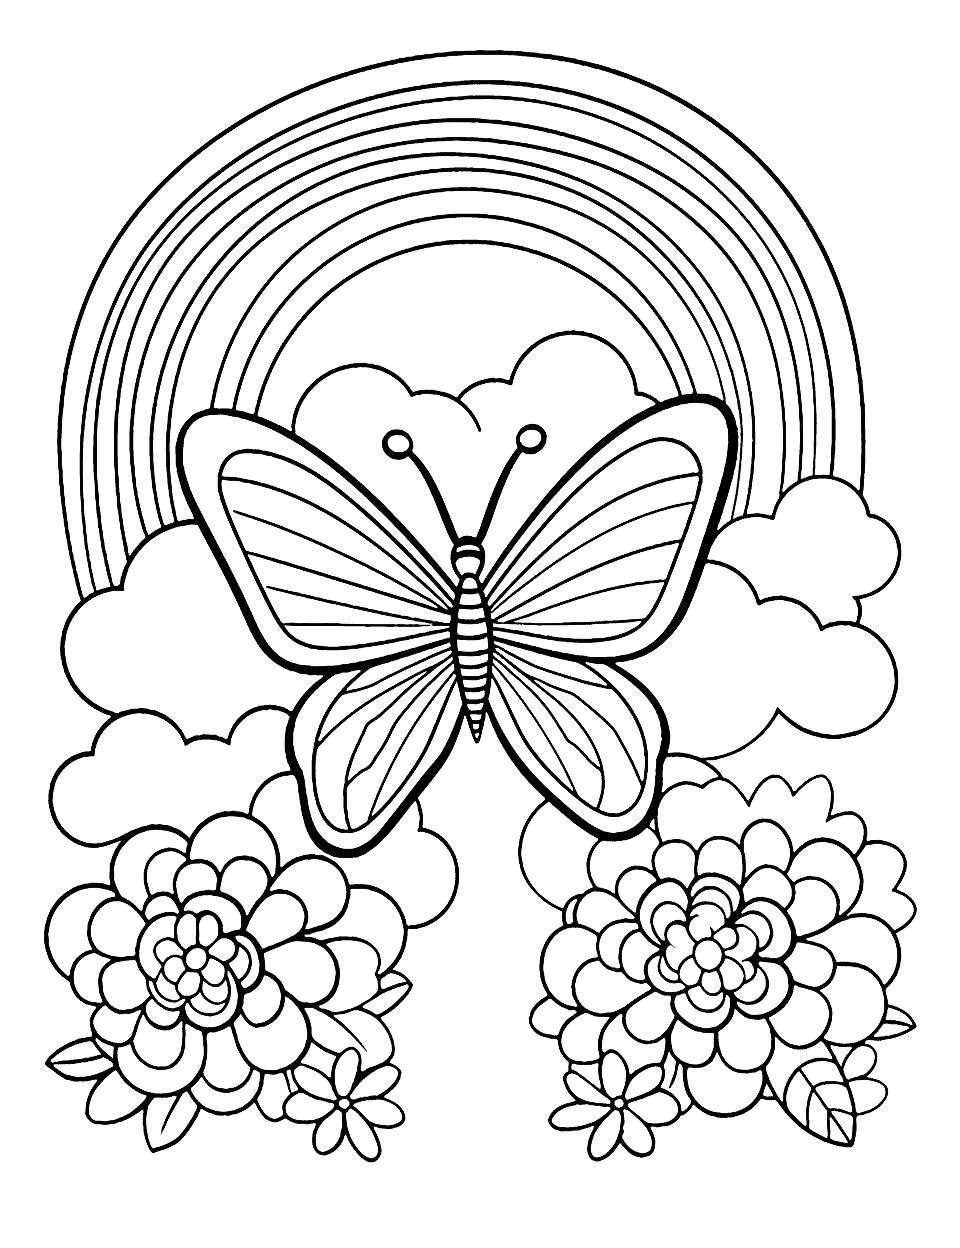 Butterfly Rainbow Coloring Page - A butterfly with rainbow-colored wings flitting over beautiful flowers.